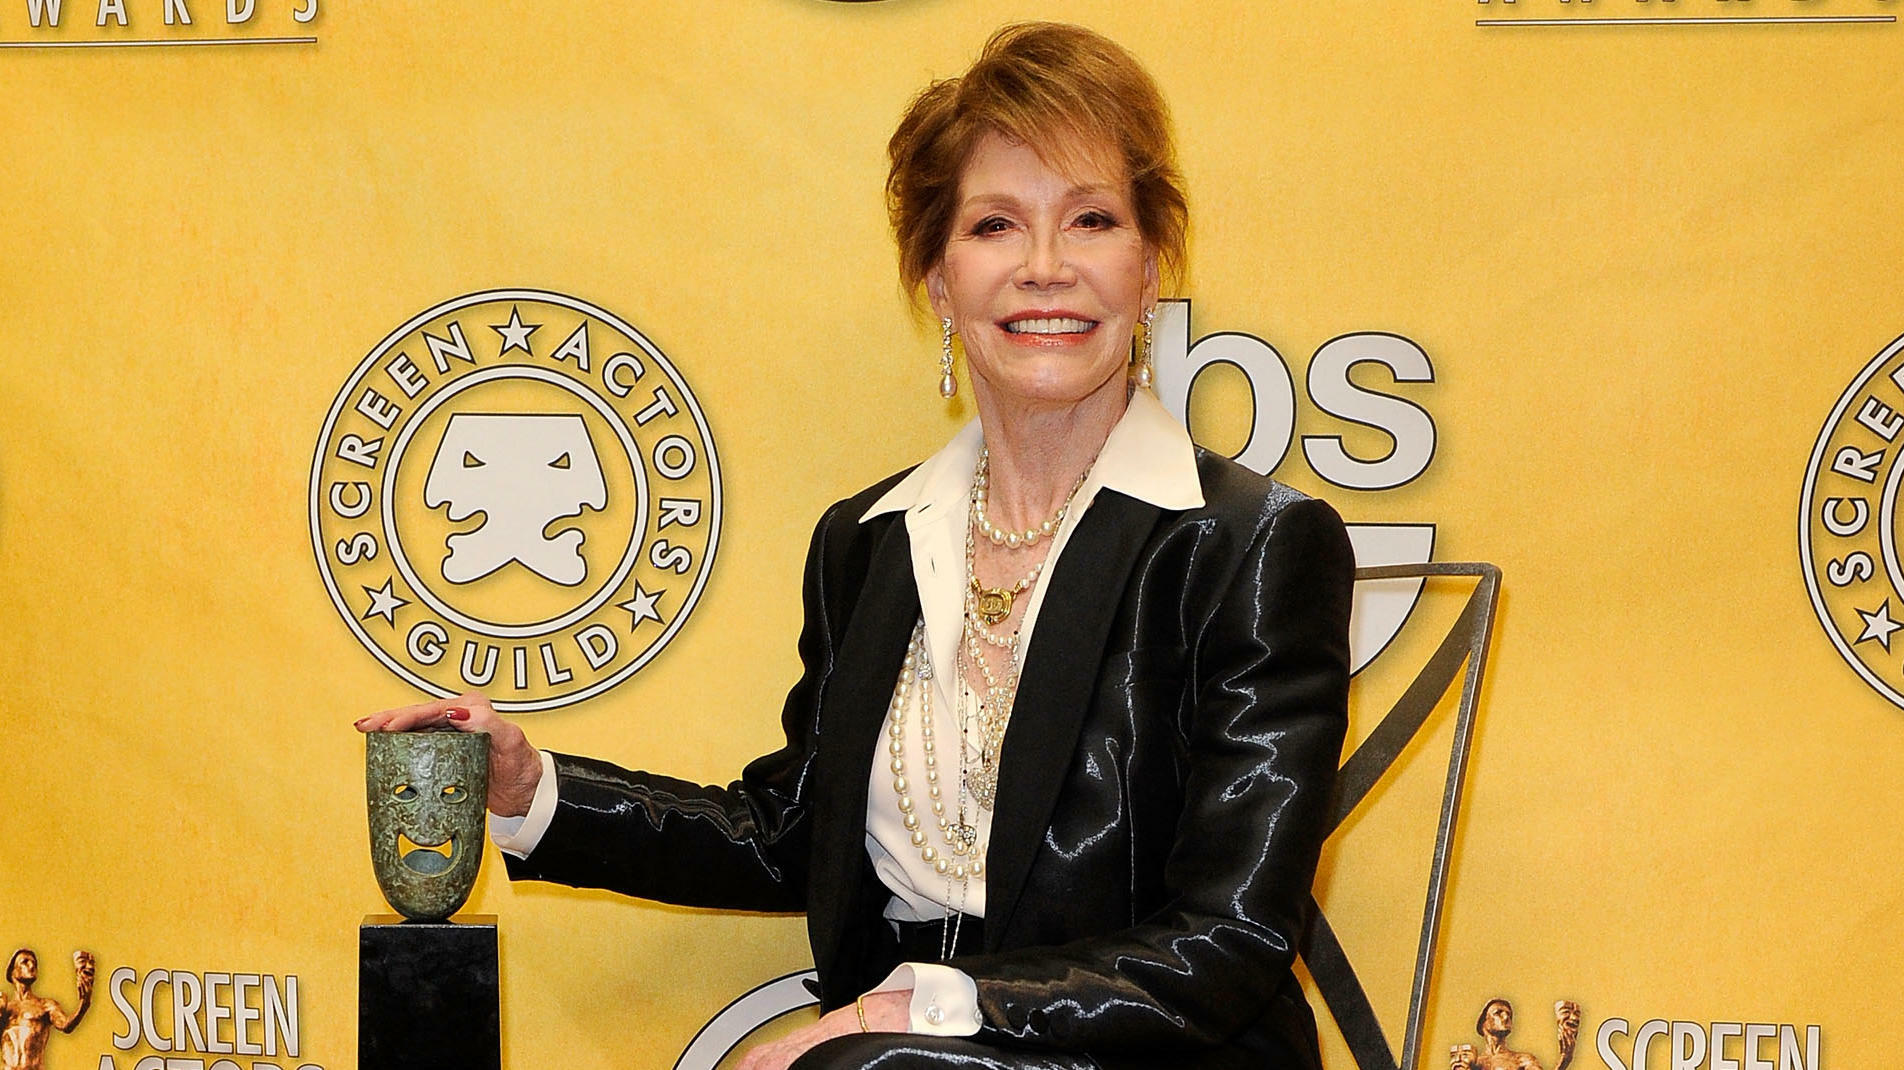 LOS ANGELES, CA - JANUARY 29:  Actress Mary Tyler Moore poses with her Life Achievement Award from the Screen Actors Guild backstage at the 18th Annual Screen Actors Guild Awards at The Shrine Auditorium on January 29, 2012 in Los Angeles, California.  (P